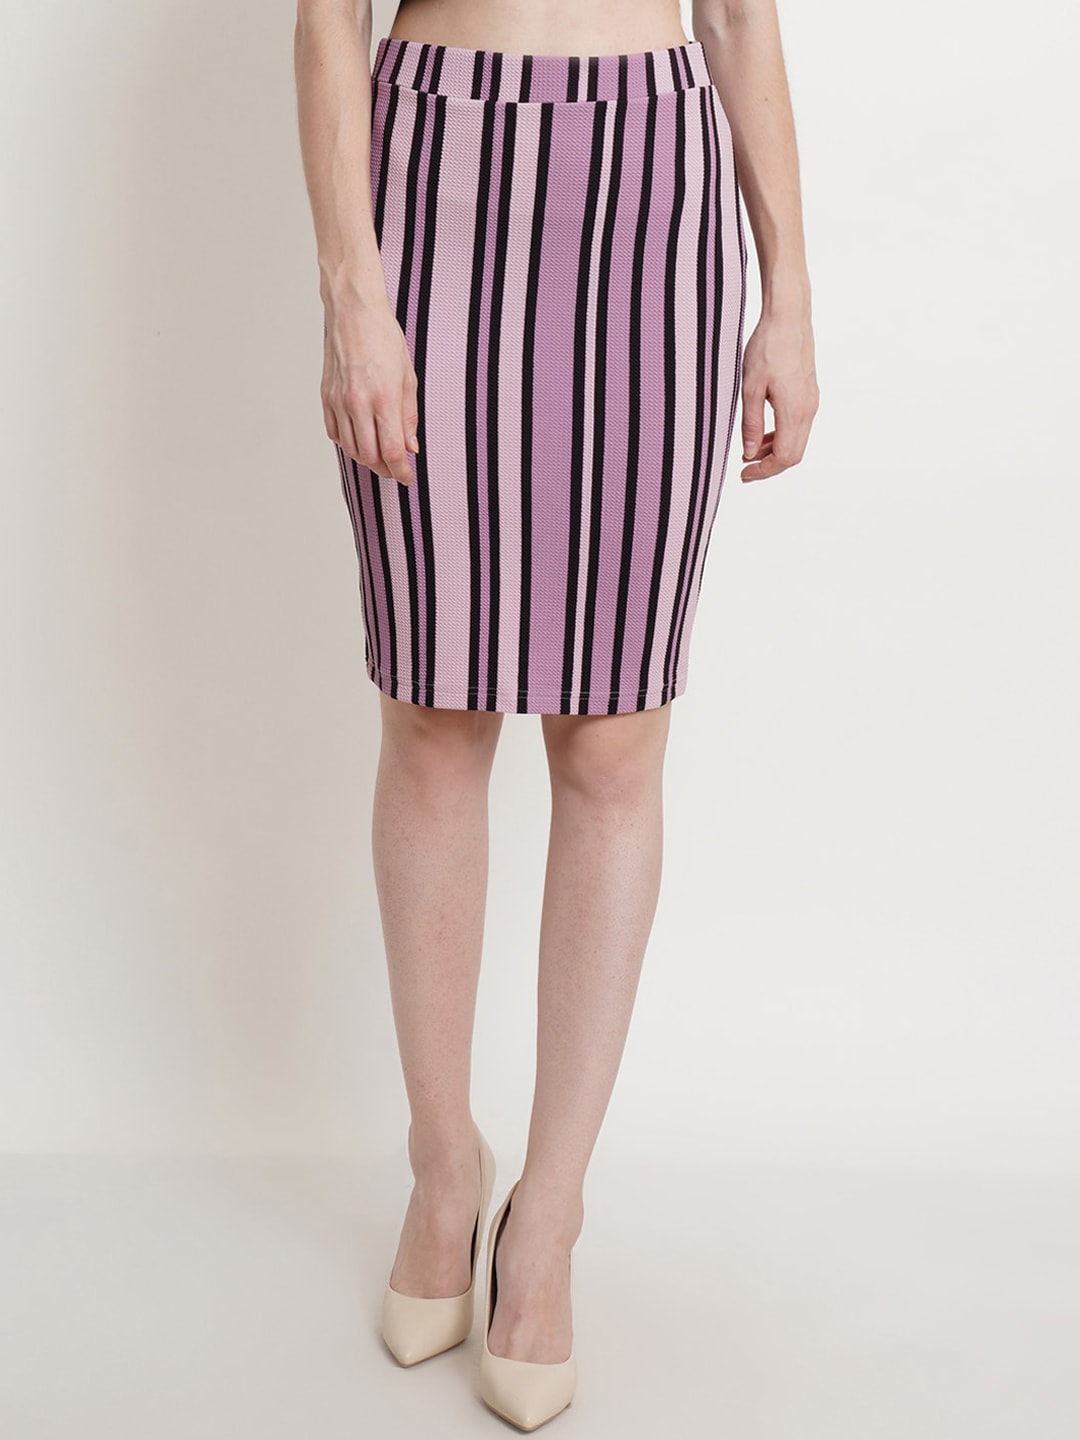 Popwings Women Lavender-Colored & Black Striped Pencil Knee-Length Skirt Price in India